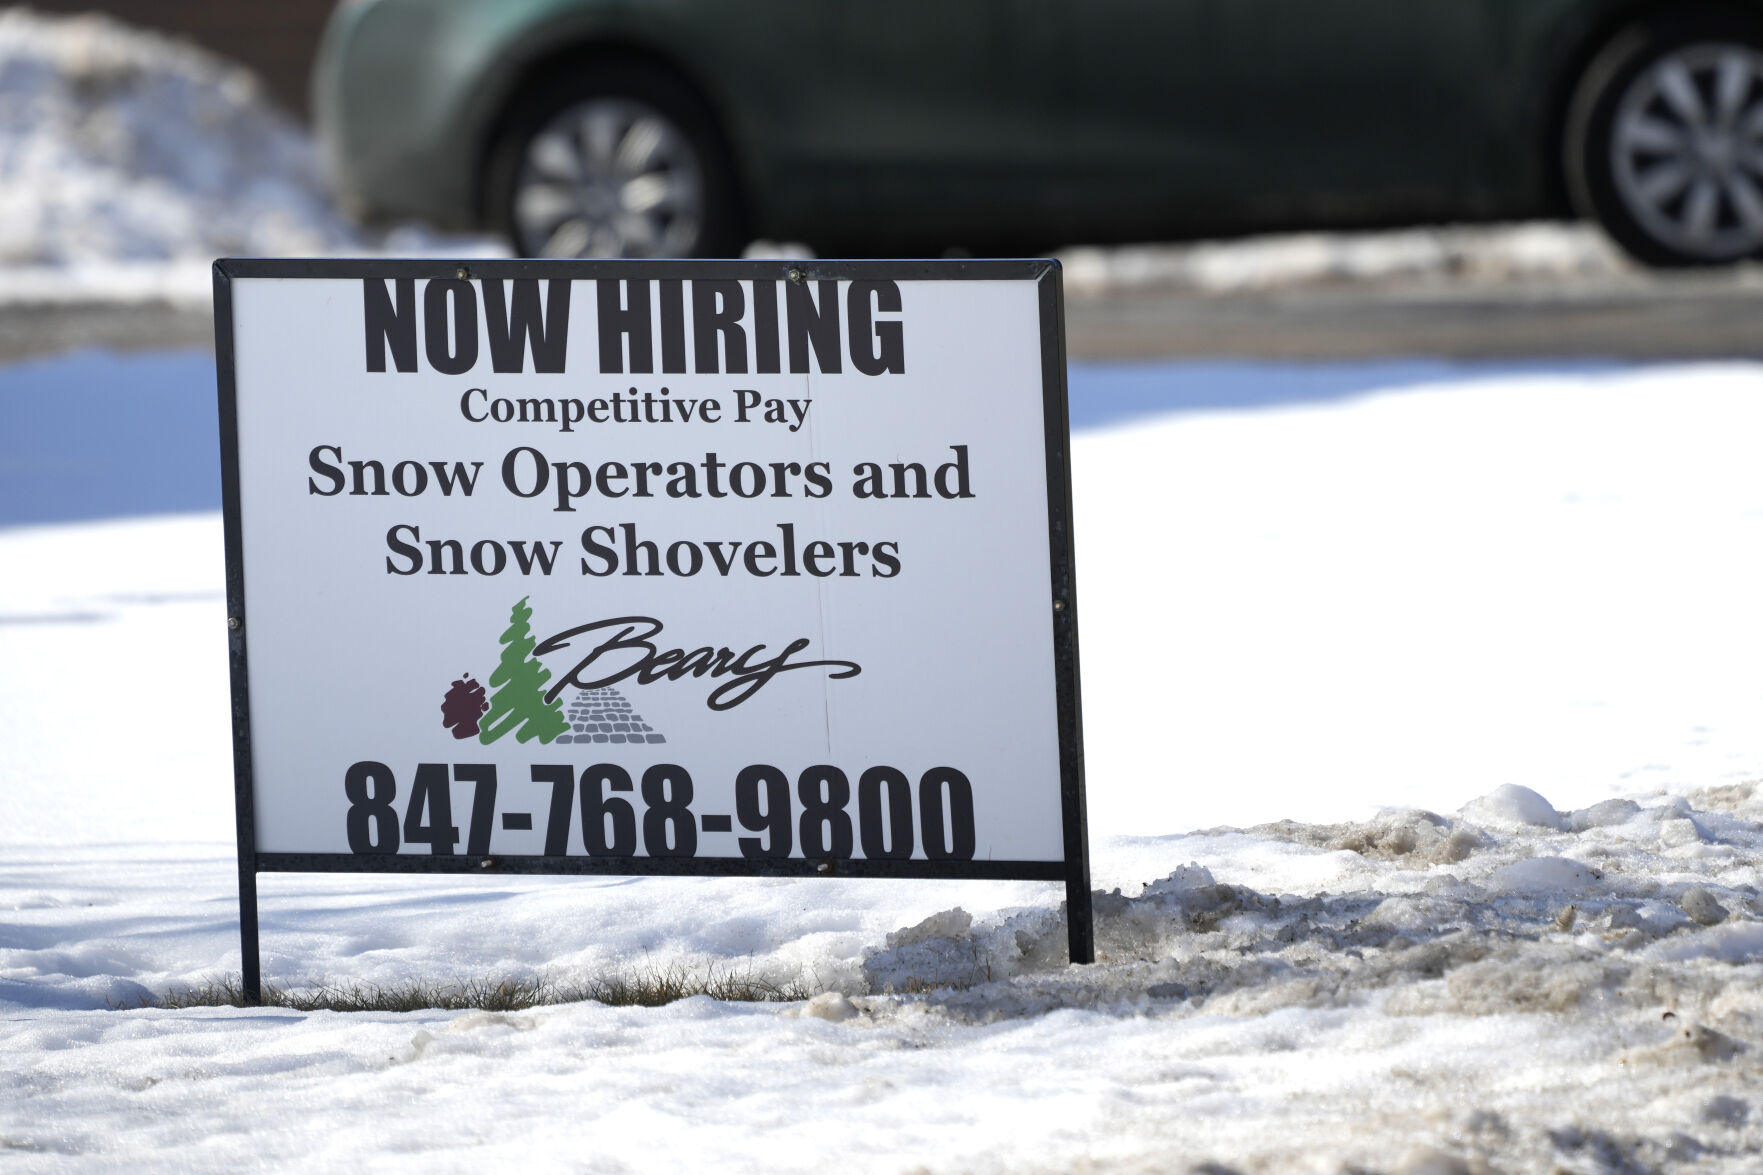 <p>A hiring sign is displayed in Arlington Heights, Ill., Sunday, Feb. 5, 2022. On Thursday, the Labor Department reports on the number of people who applied for unemployment benefits last week. (AP Photo/Nam Y. Huh)</p>   PHOTO CREDIT: Nam Y. Huh 